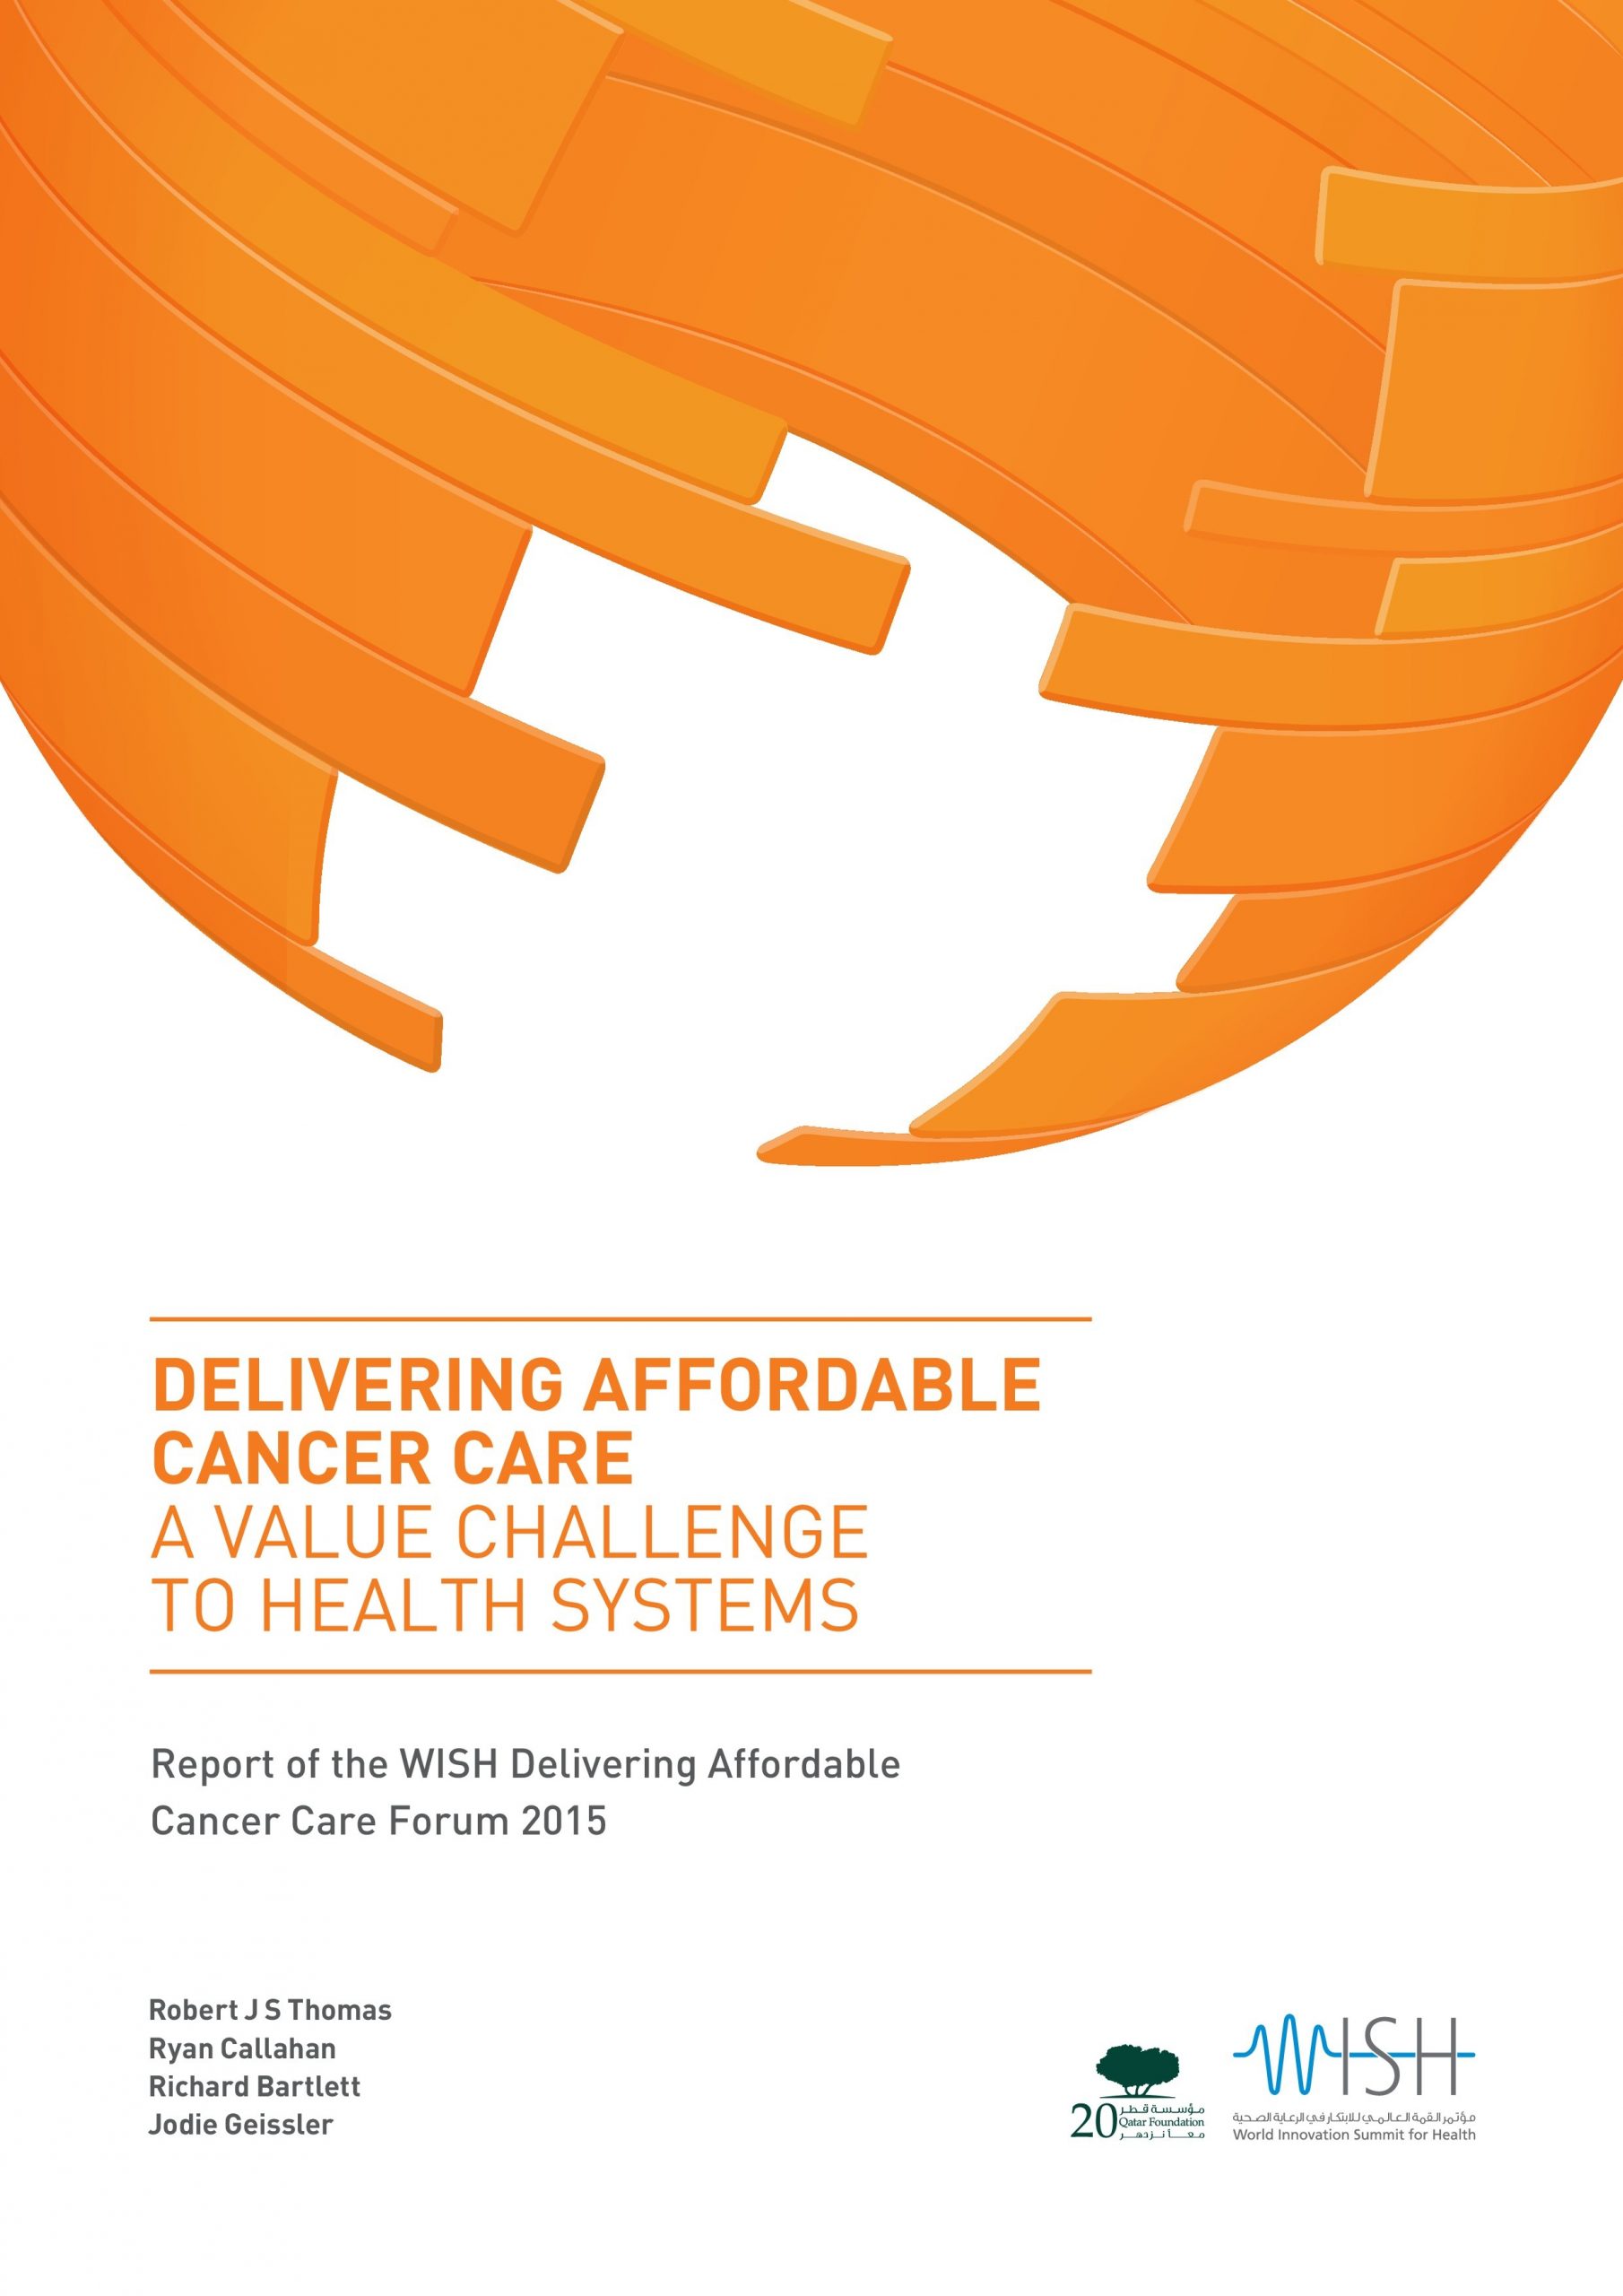 Delivering Affordable Cancer Care: A Value Challenge to Health Systems